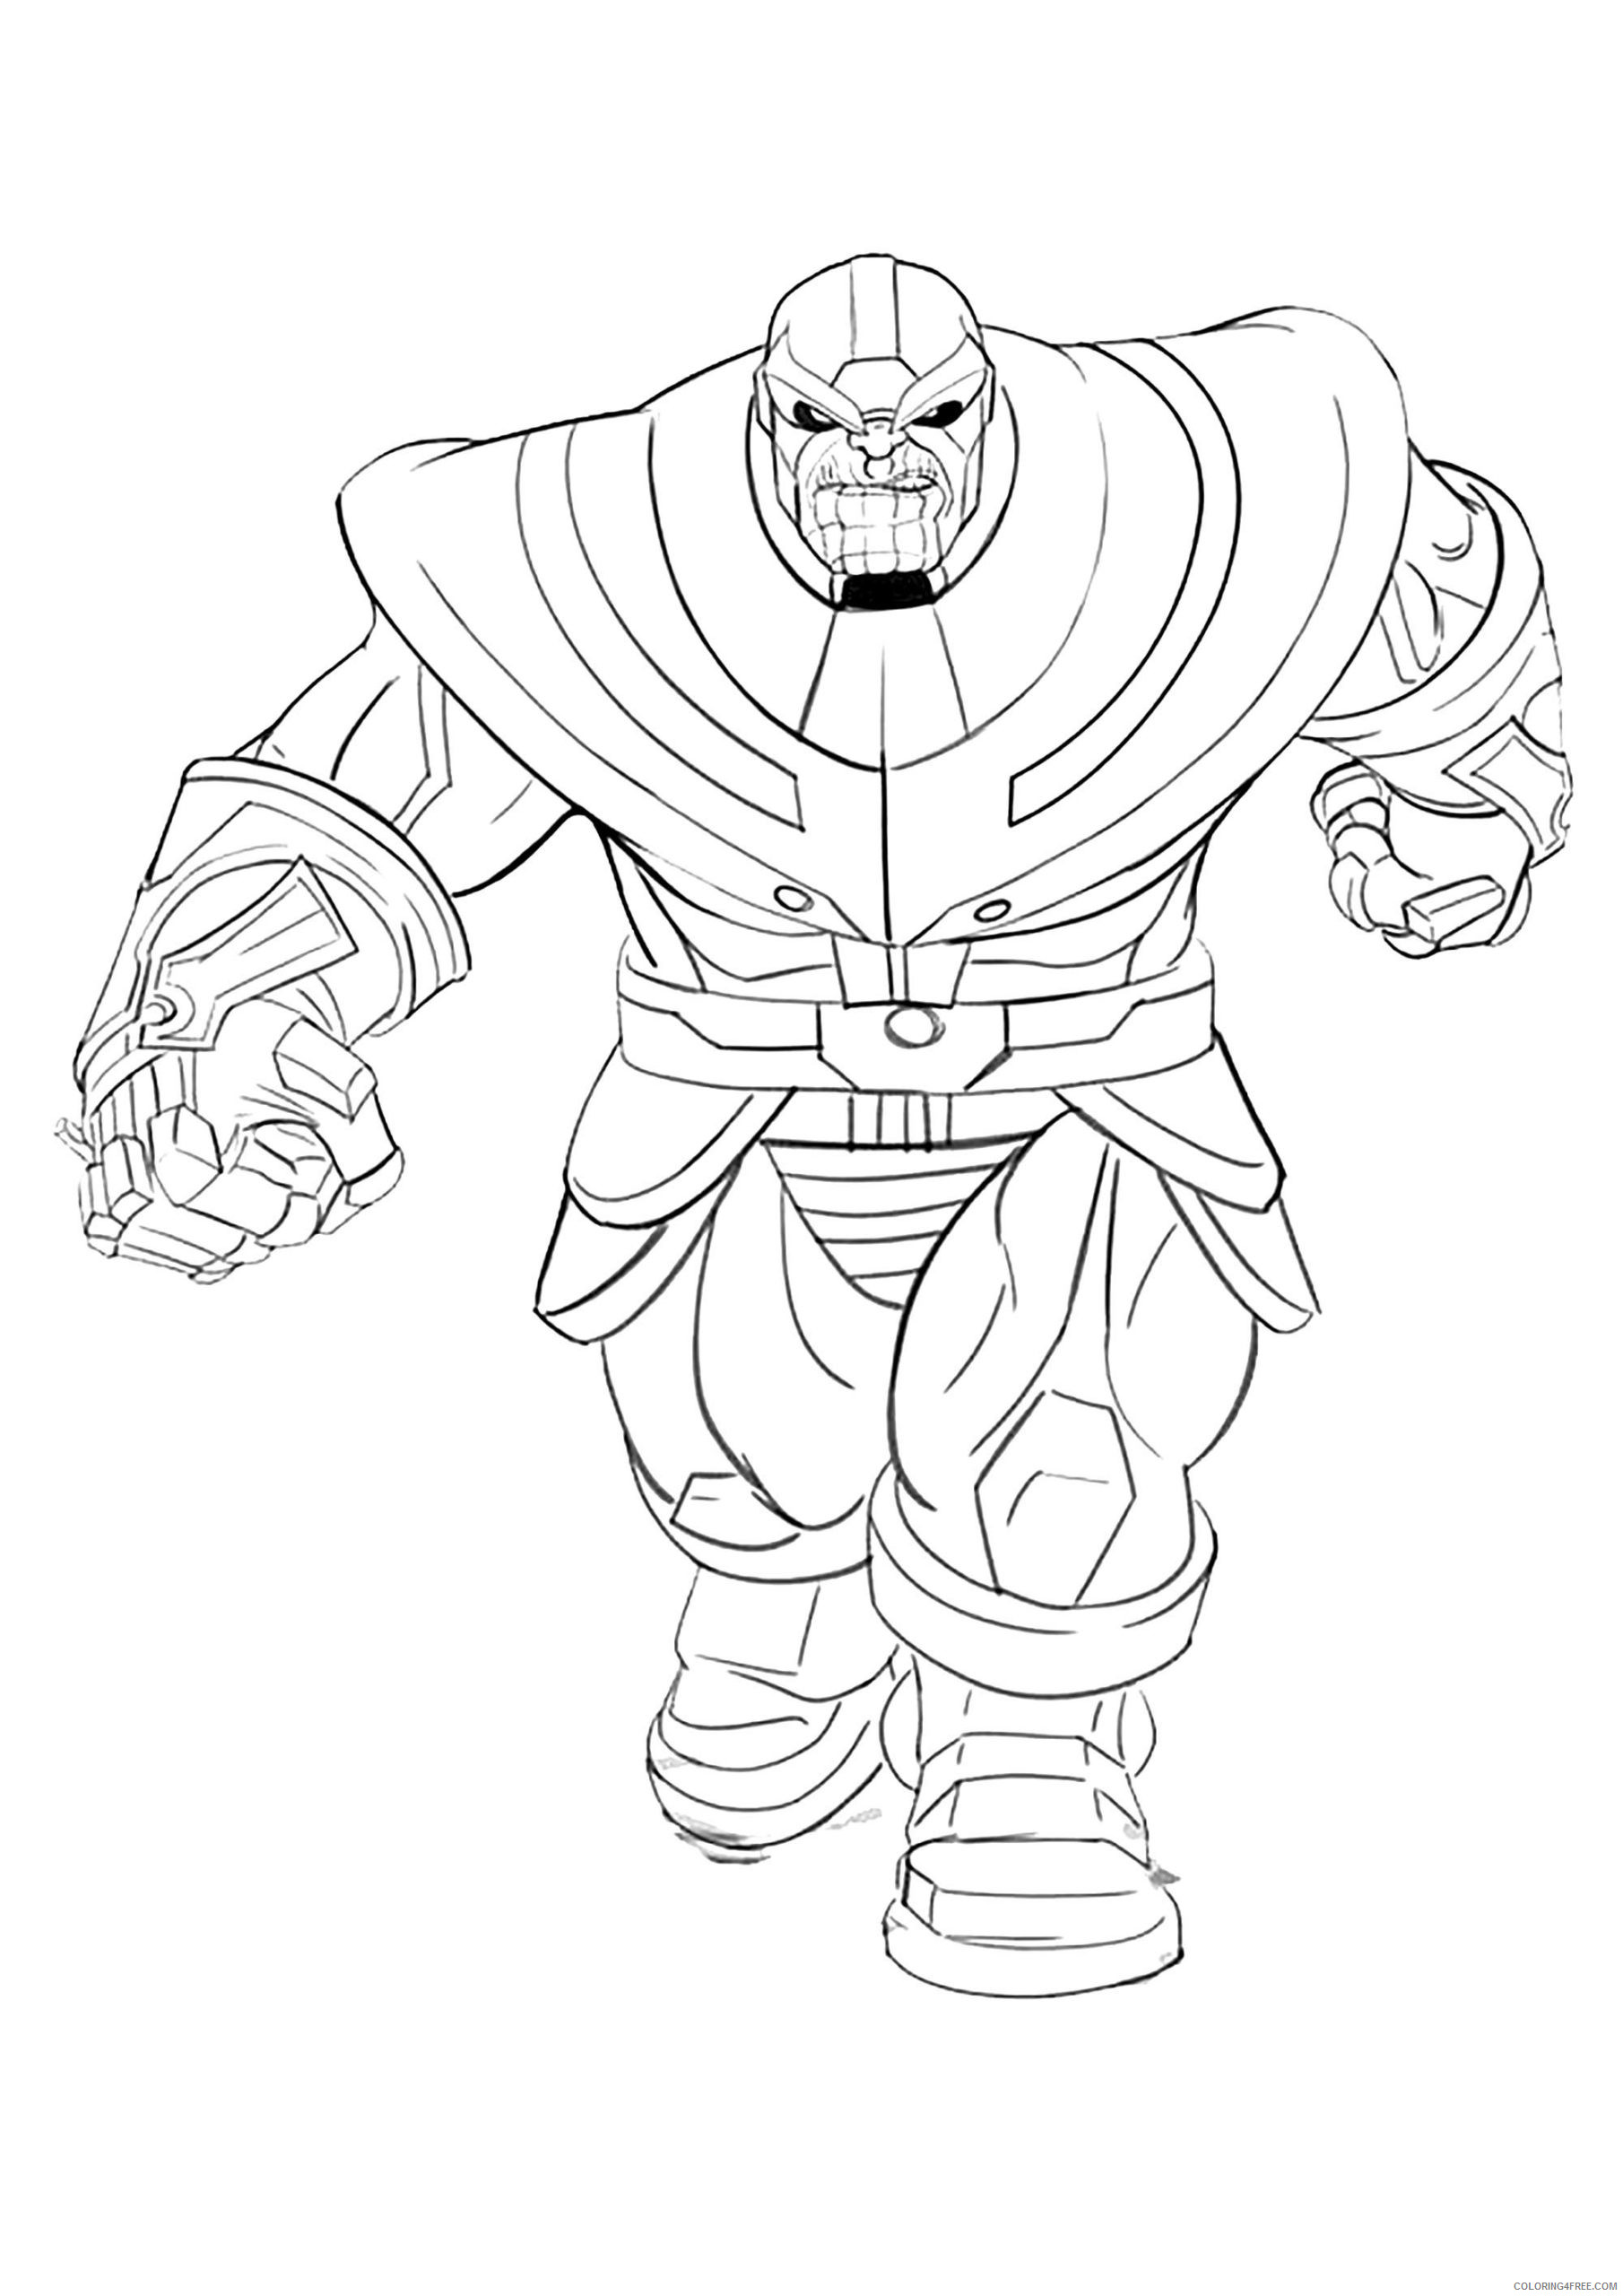 Thanos Coloring Pages Cartoons Thanos Supervillain Printable 2020 6369 Coloring4free